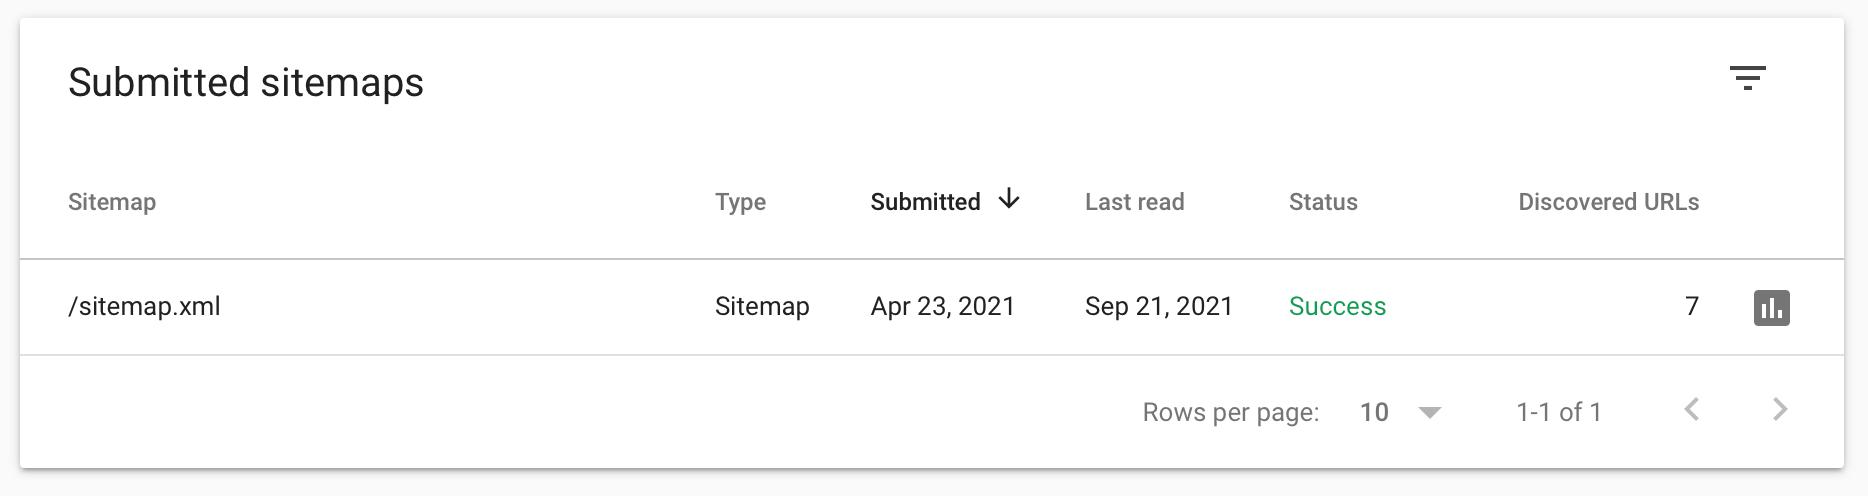 Screenshot of submitted sitempas in Google Search Console